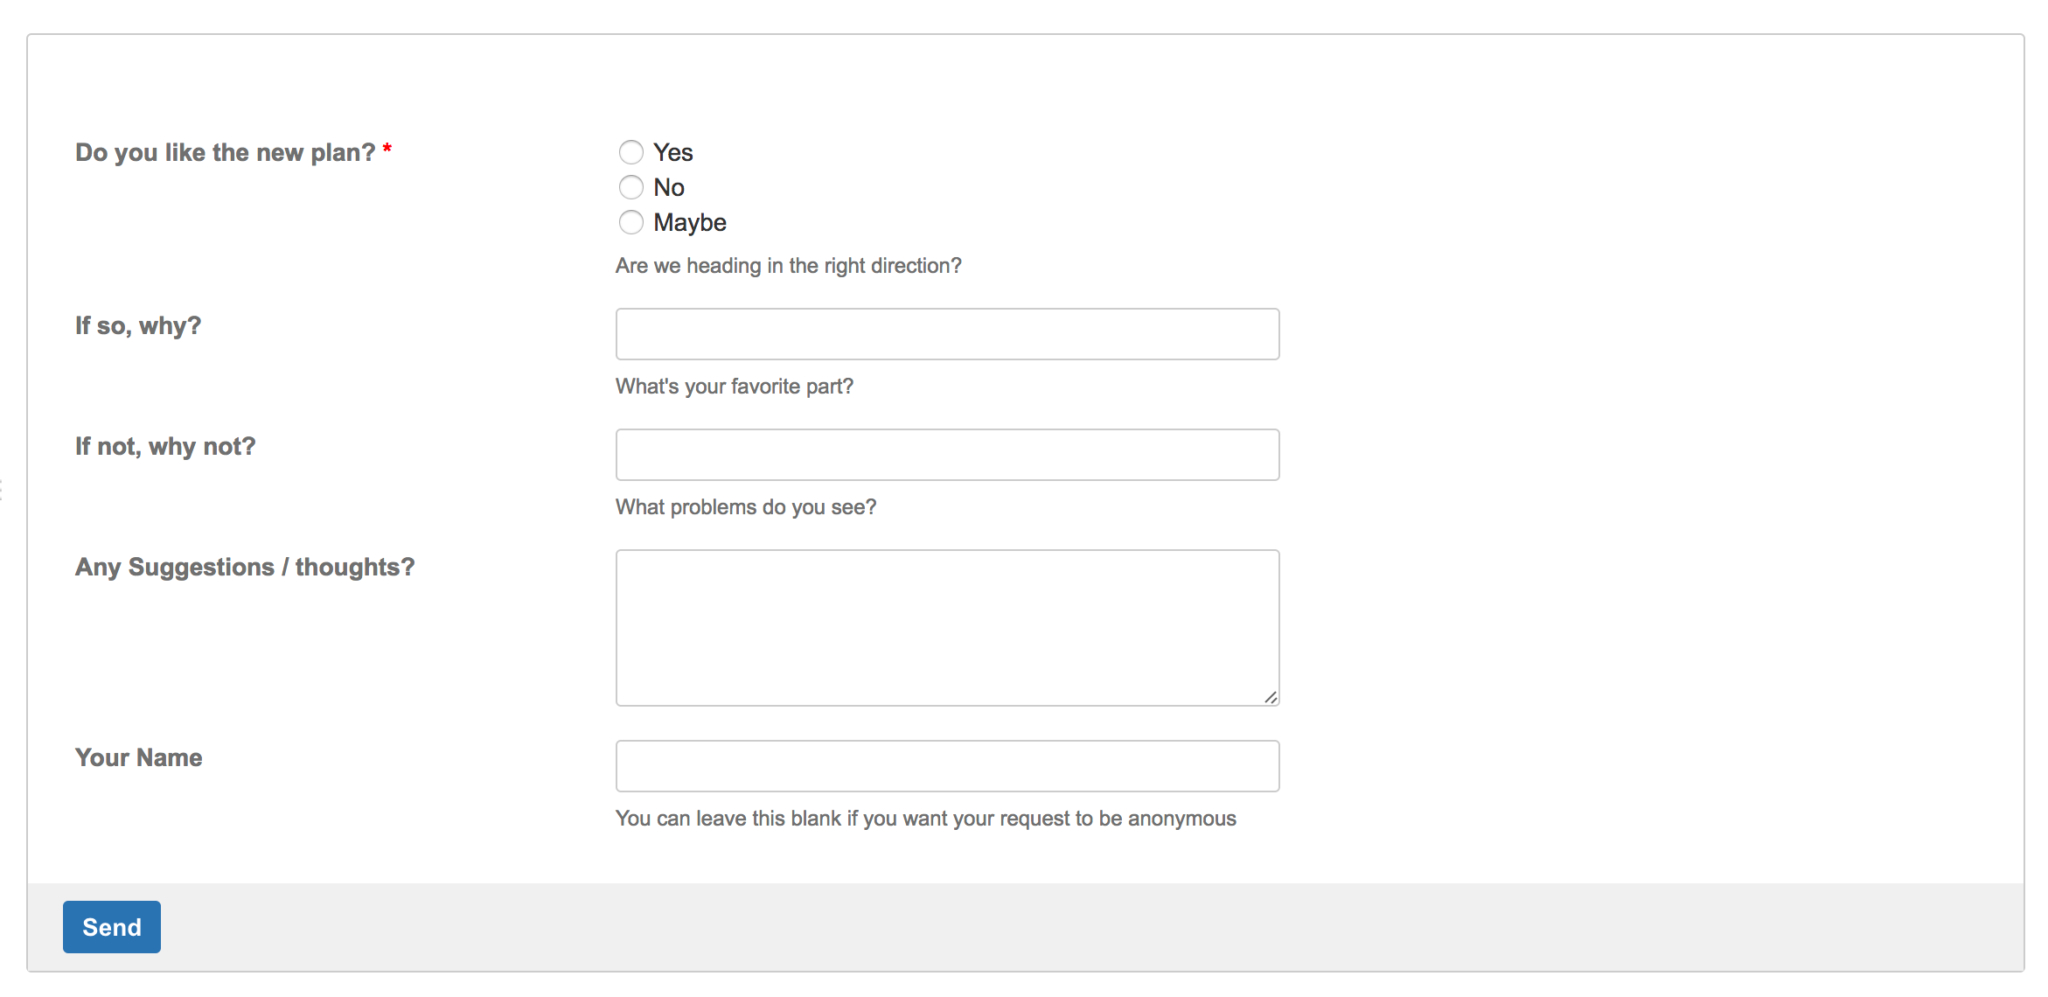 6 Simple Hr Forms You Can Use In Confluence - Atlassian Blog Work Life - Free Printable Hr Forms